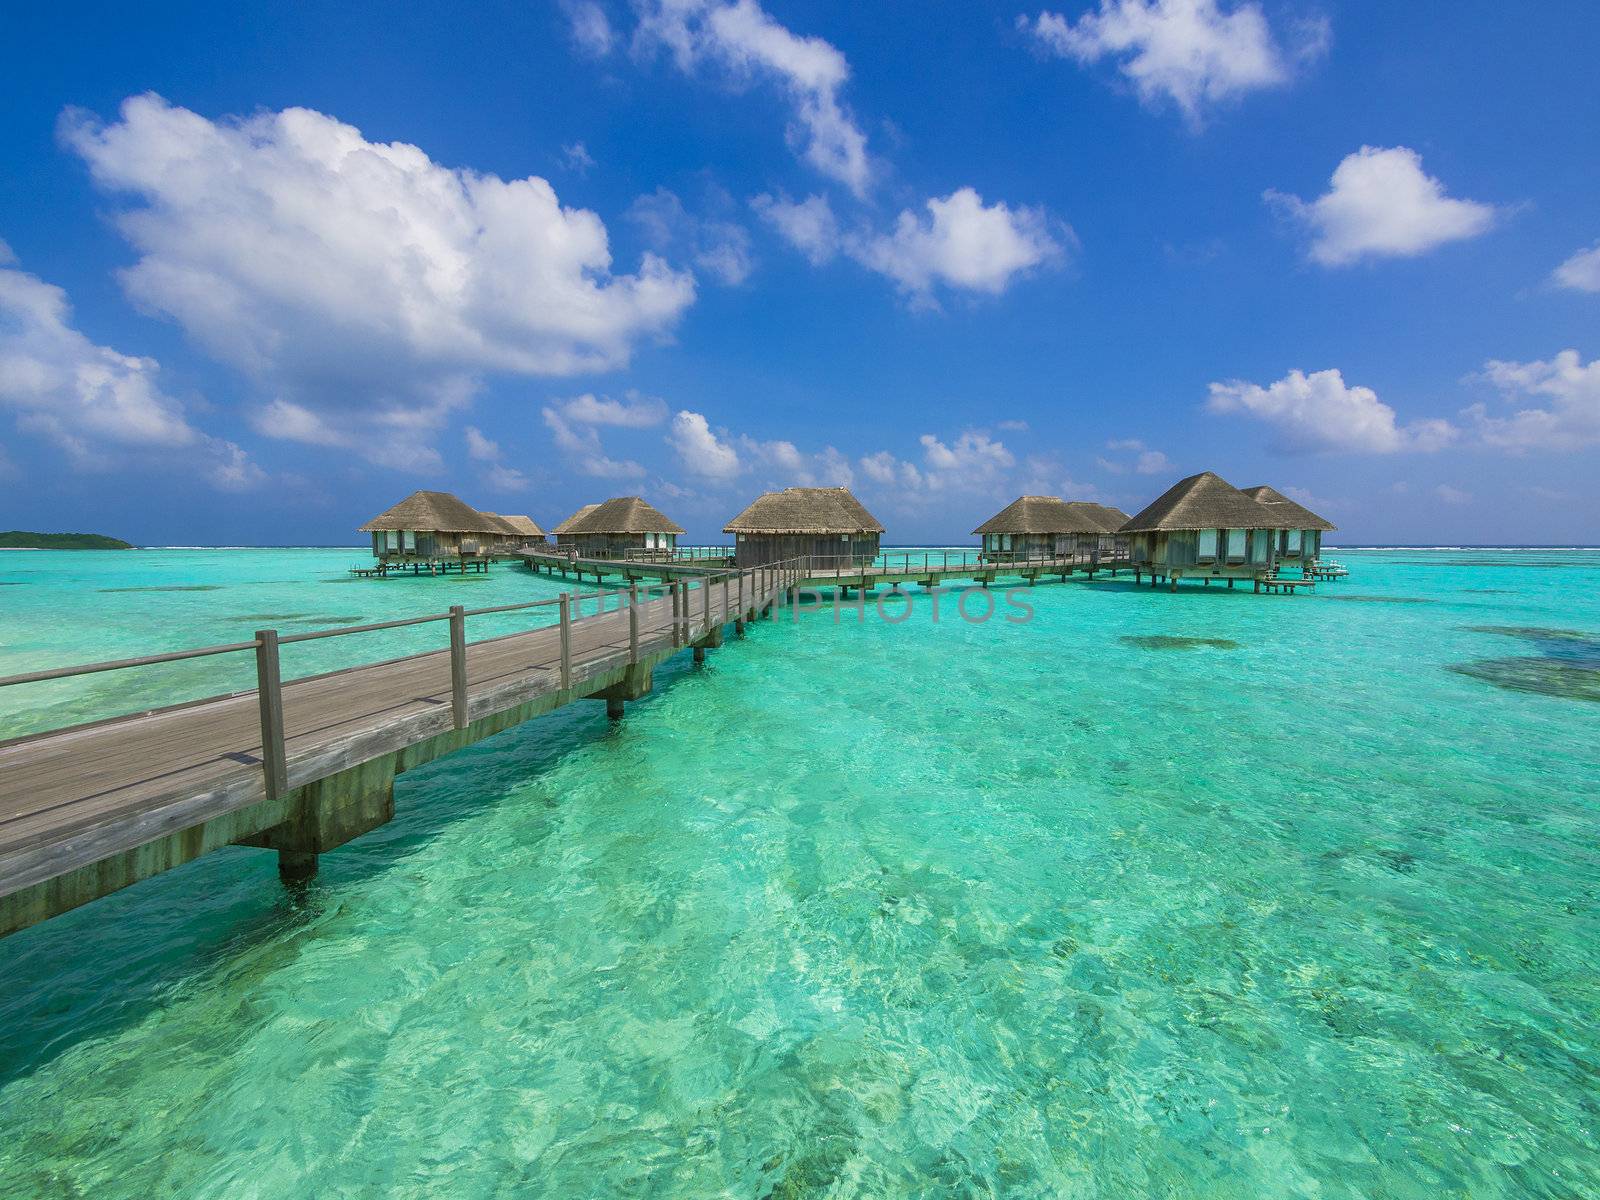 Water bungalows in paradise by f/2sumicron